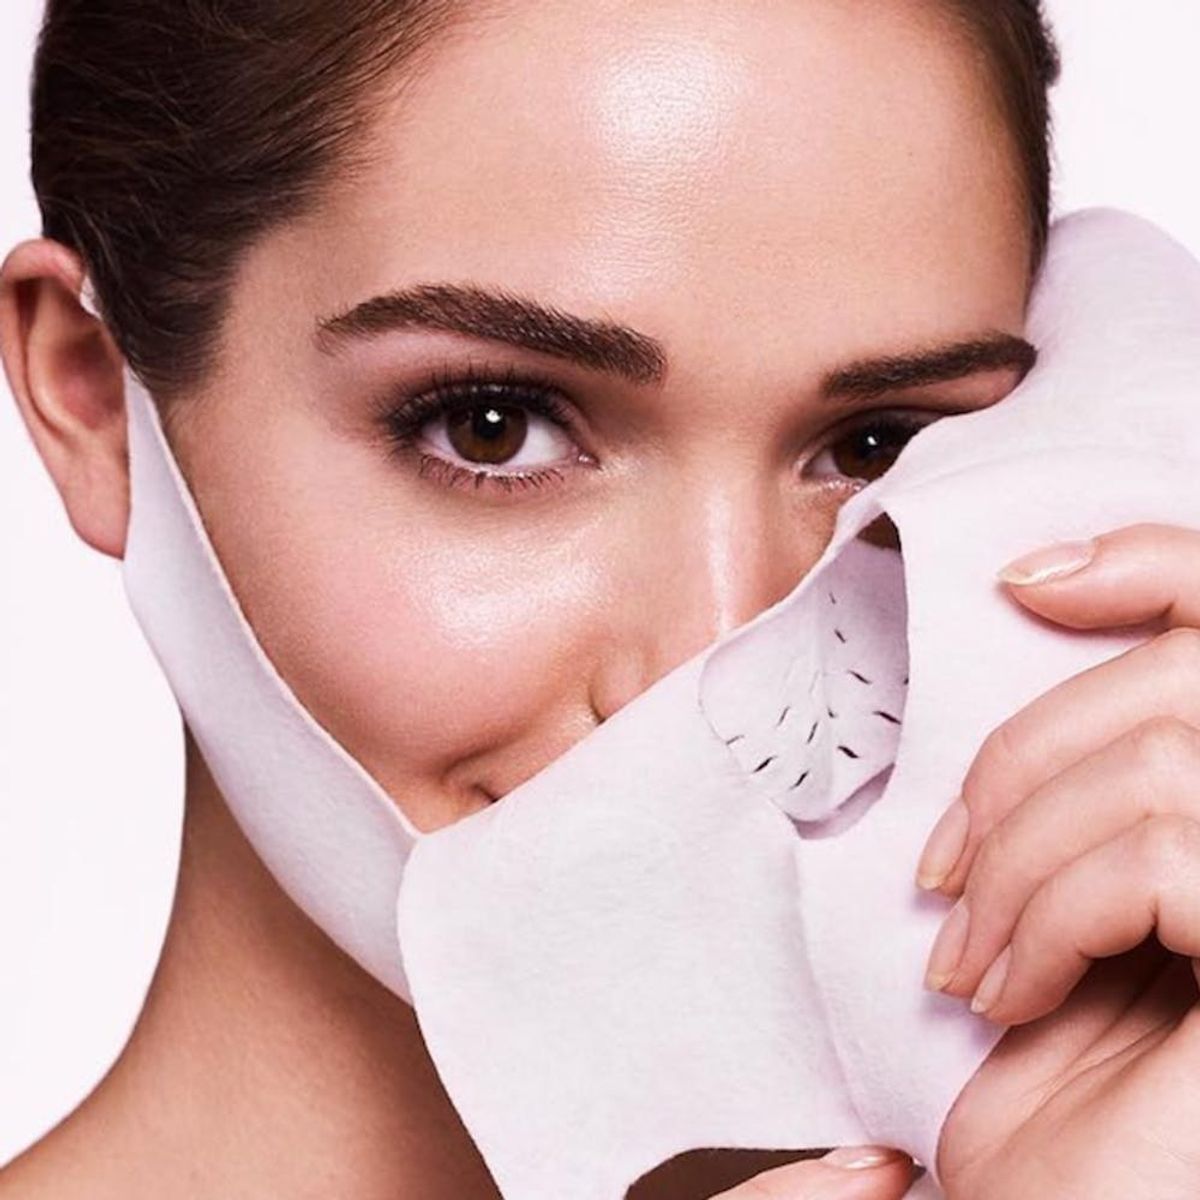 Charlotte Tilbury Just Changed Sheet Masks Forever With Her Dry Formula